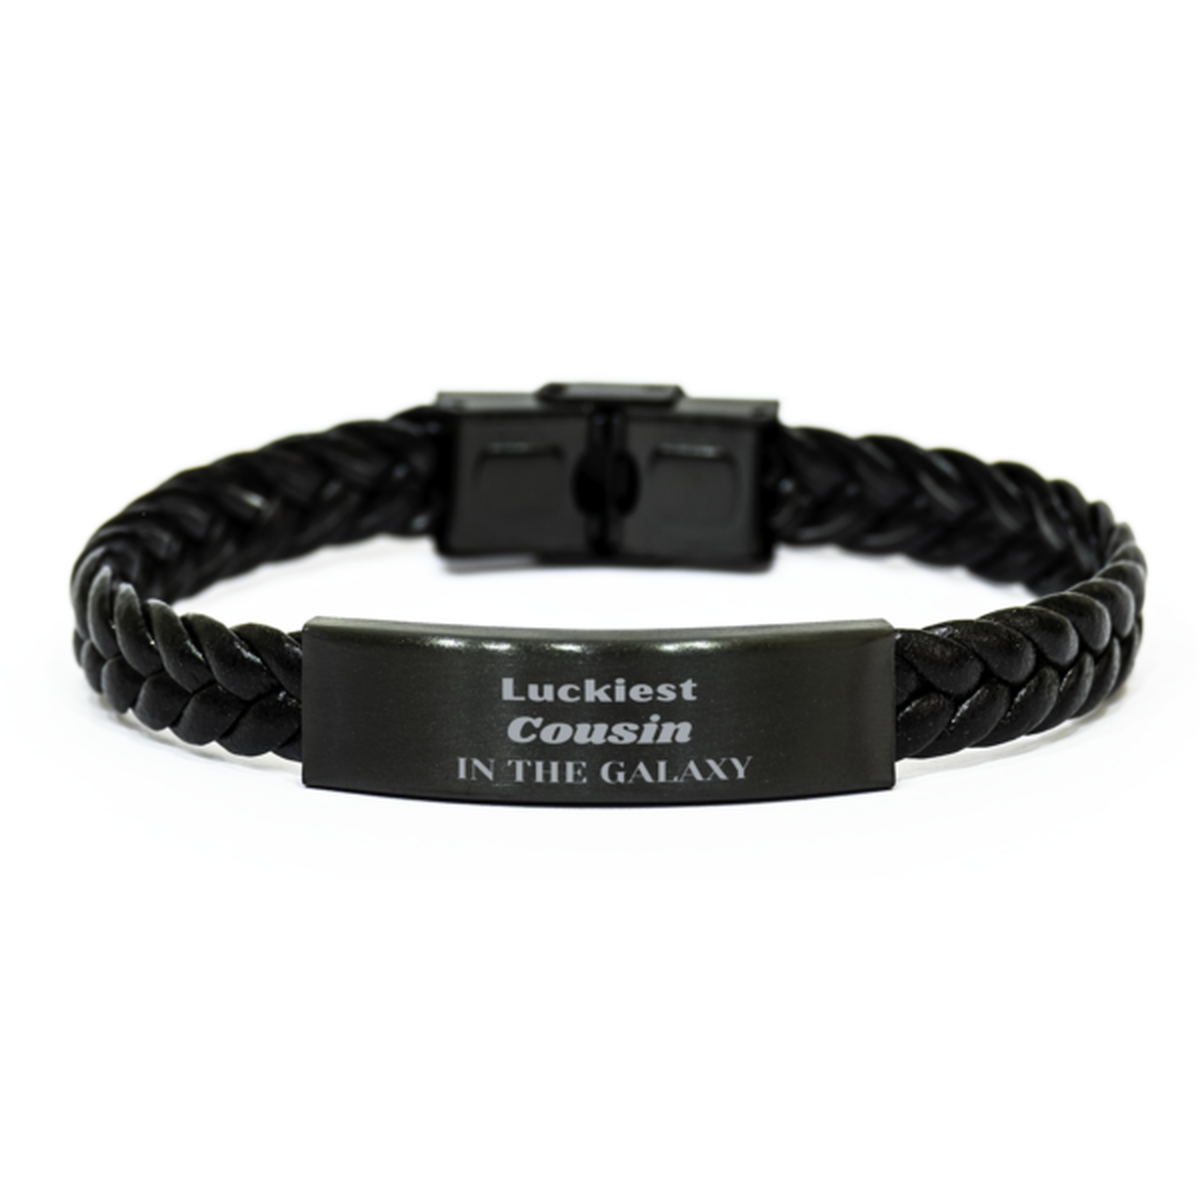 Luckiest Cousin in the Galaxy, To My Cousin Engraved Gifts, Christmas Cousin Braided Leather Bracelet Gifts, X-mas Birthday Unique Gifts For Cousin Men Women